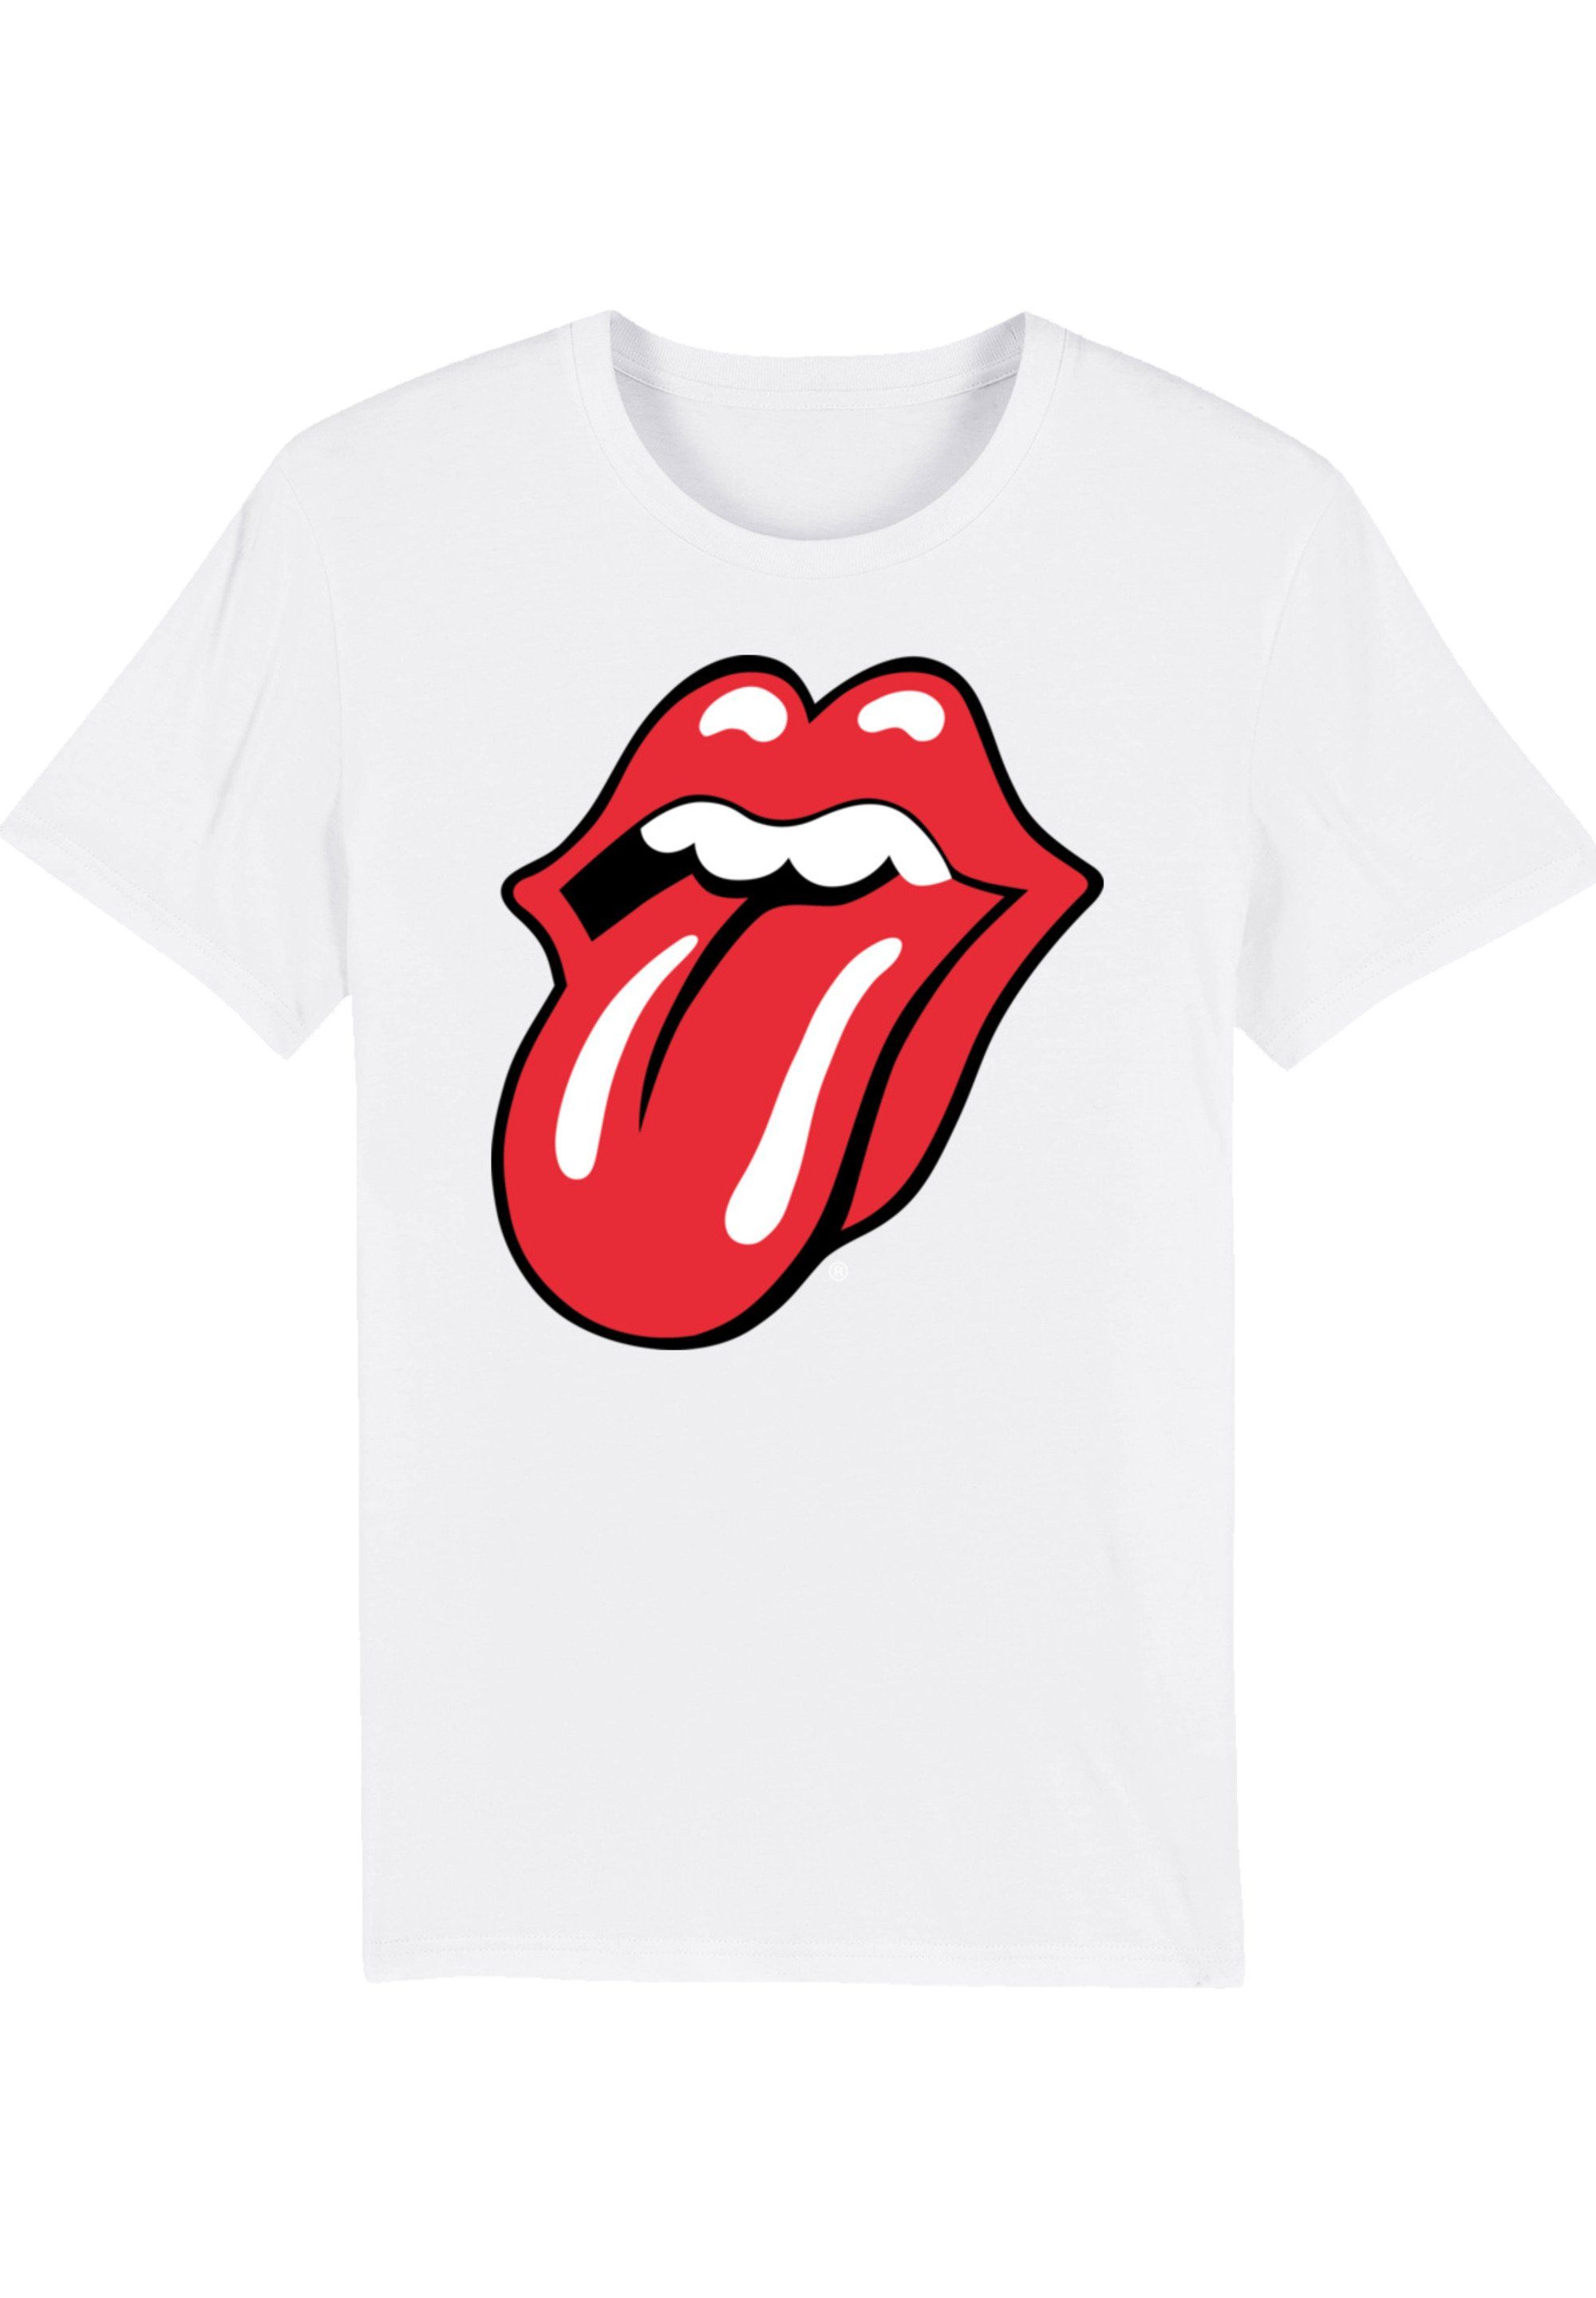 The T-Shirt Print Rolling weiß Stones F4NT4STIC Zunge Rote